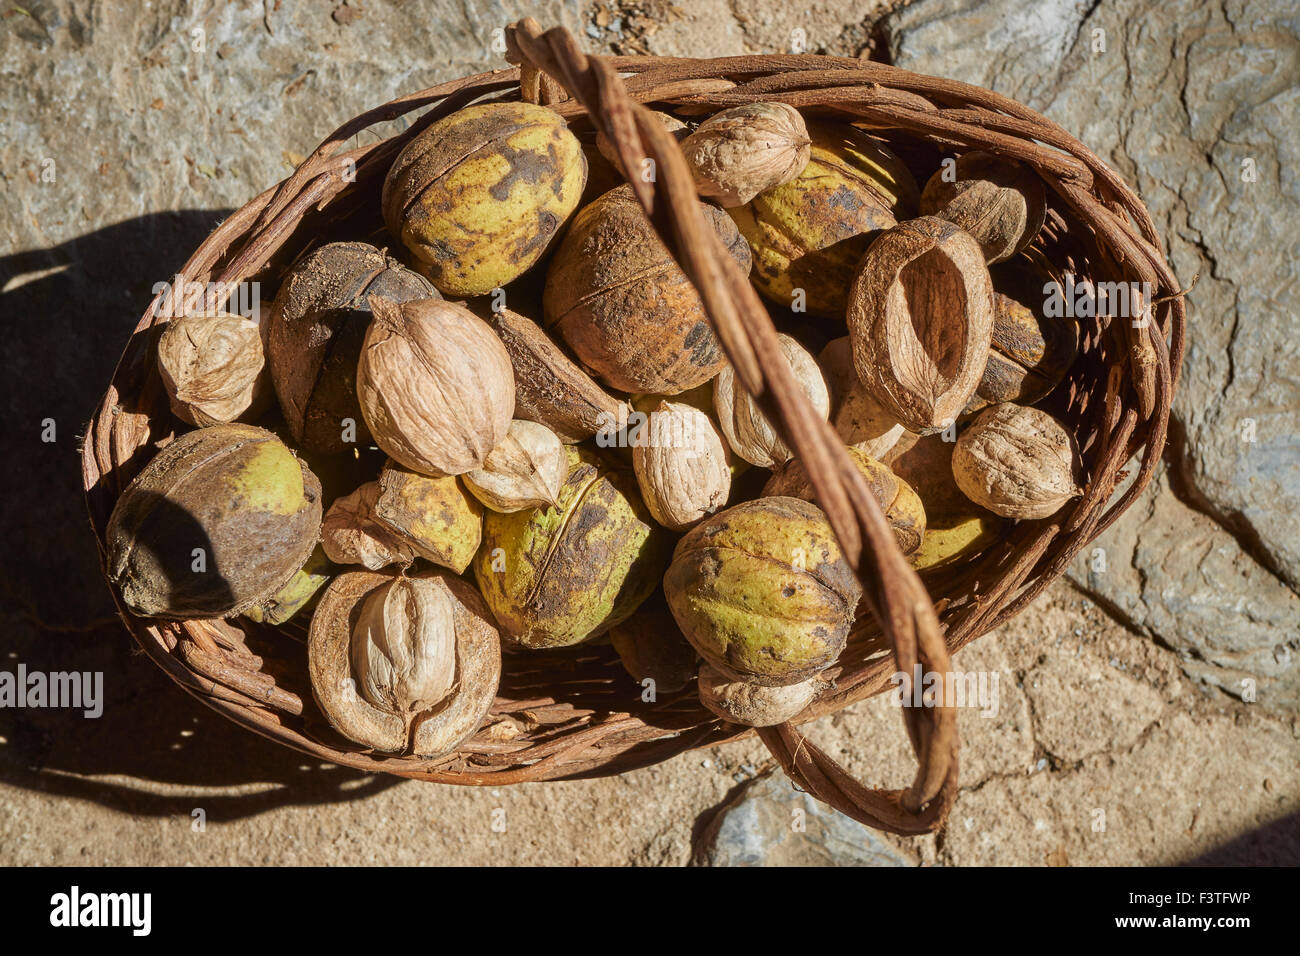 Recreated early American basket of mixed nuts Stock Photo